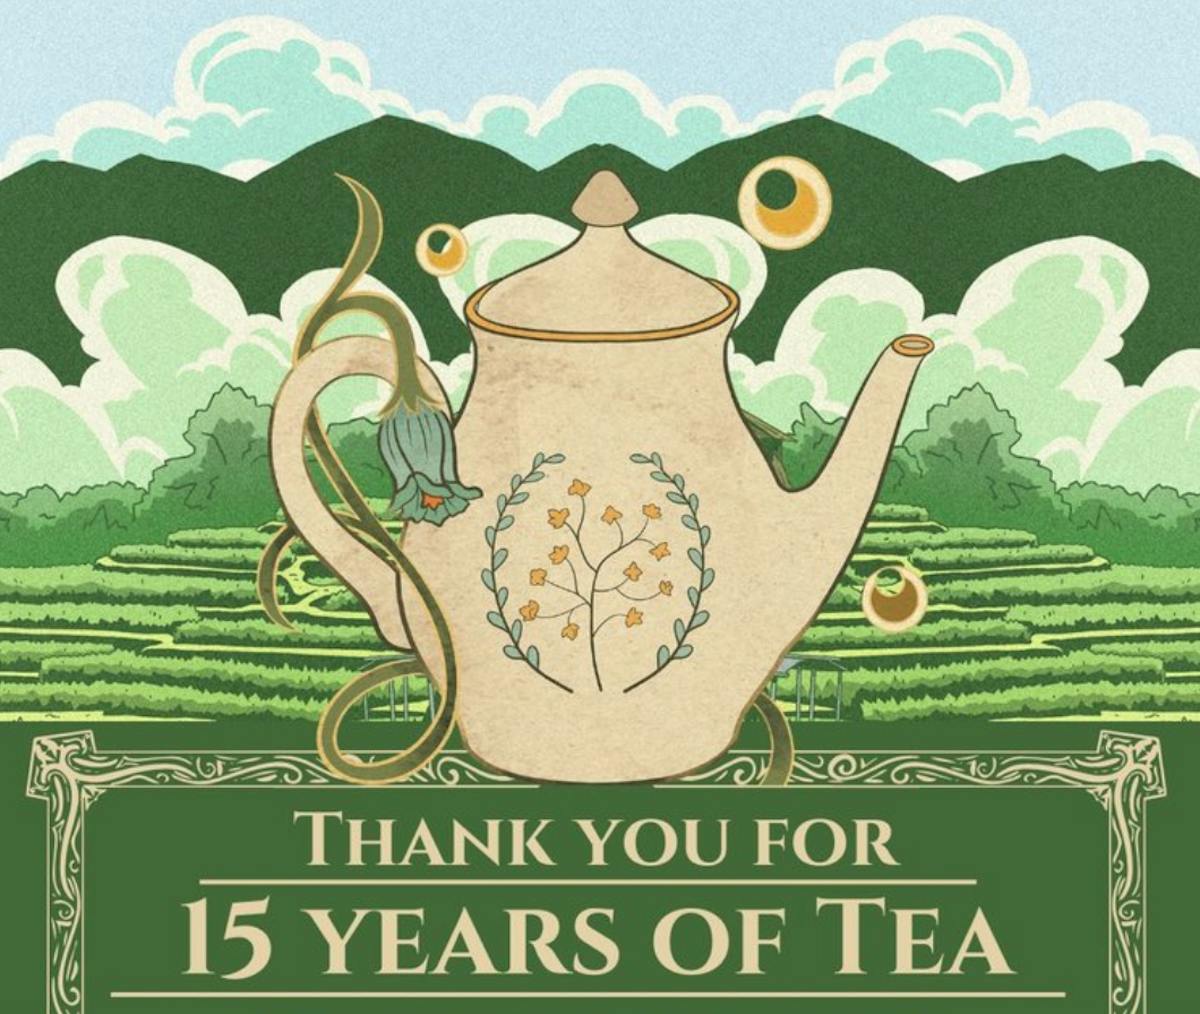 Thank You For 15 Years of Tea!